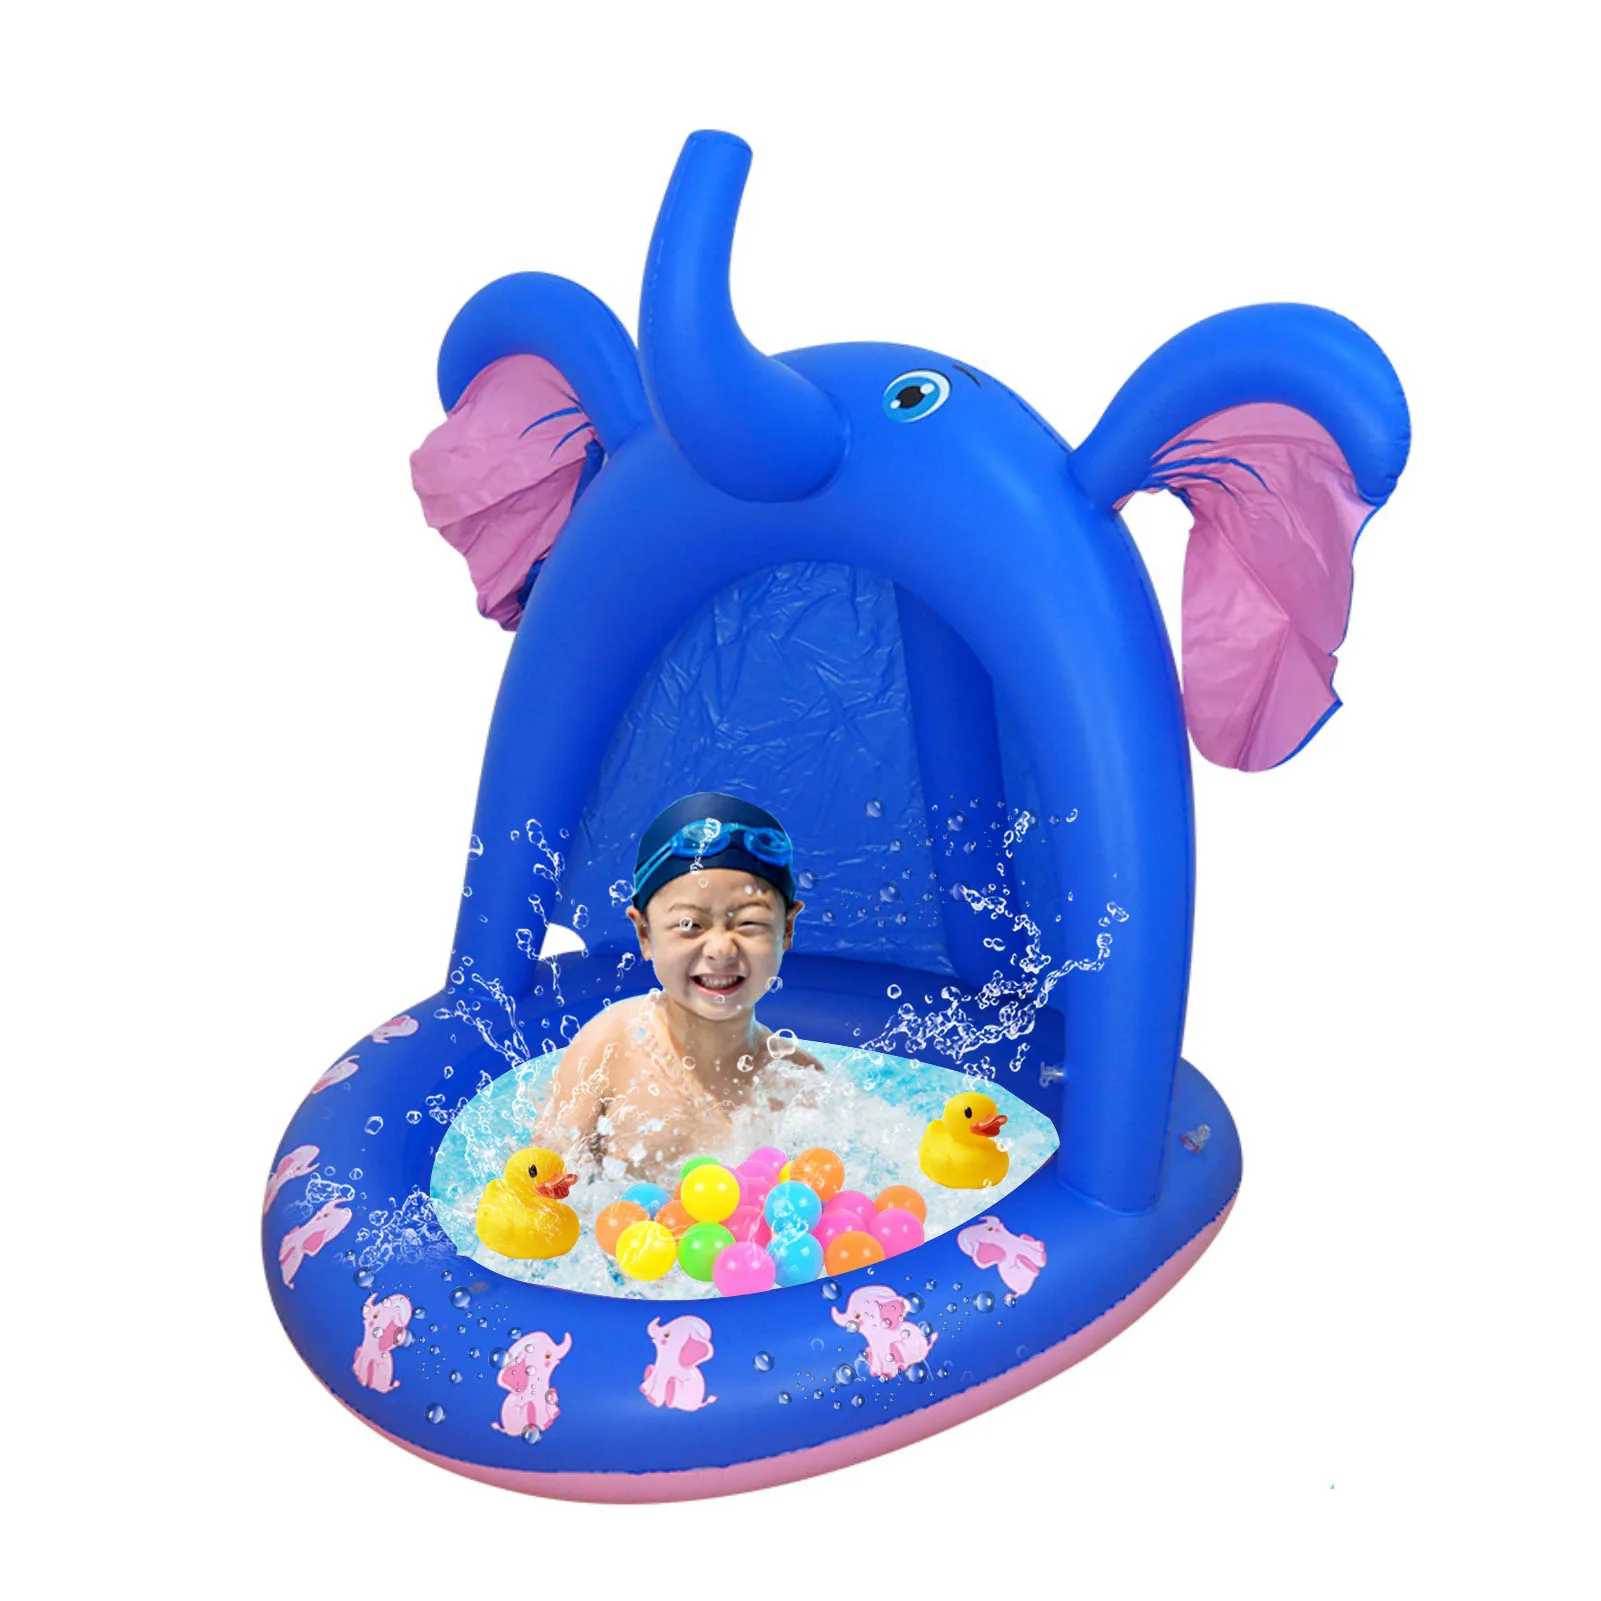 

Elephant Inflatable Fountain Baby Pool Baby Pool Sprinkler Inflatable Kiddie Pool For Toddlers With Canopy Splash Padding Pool